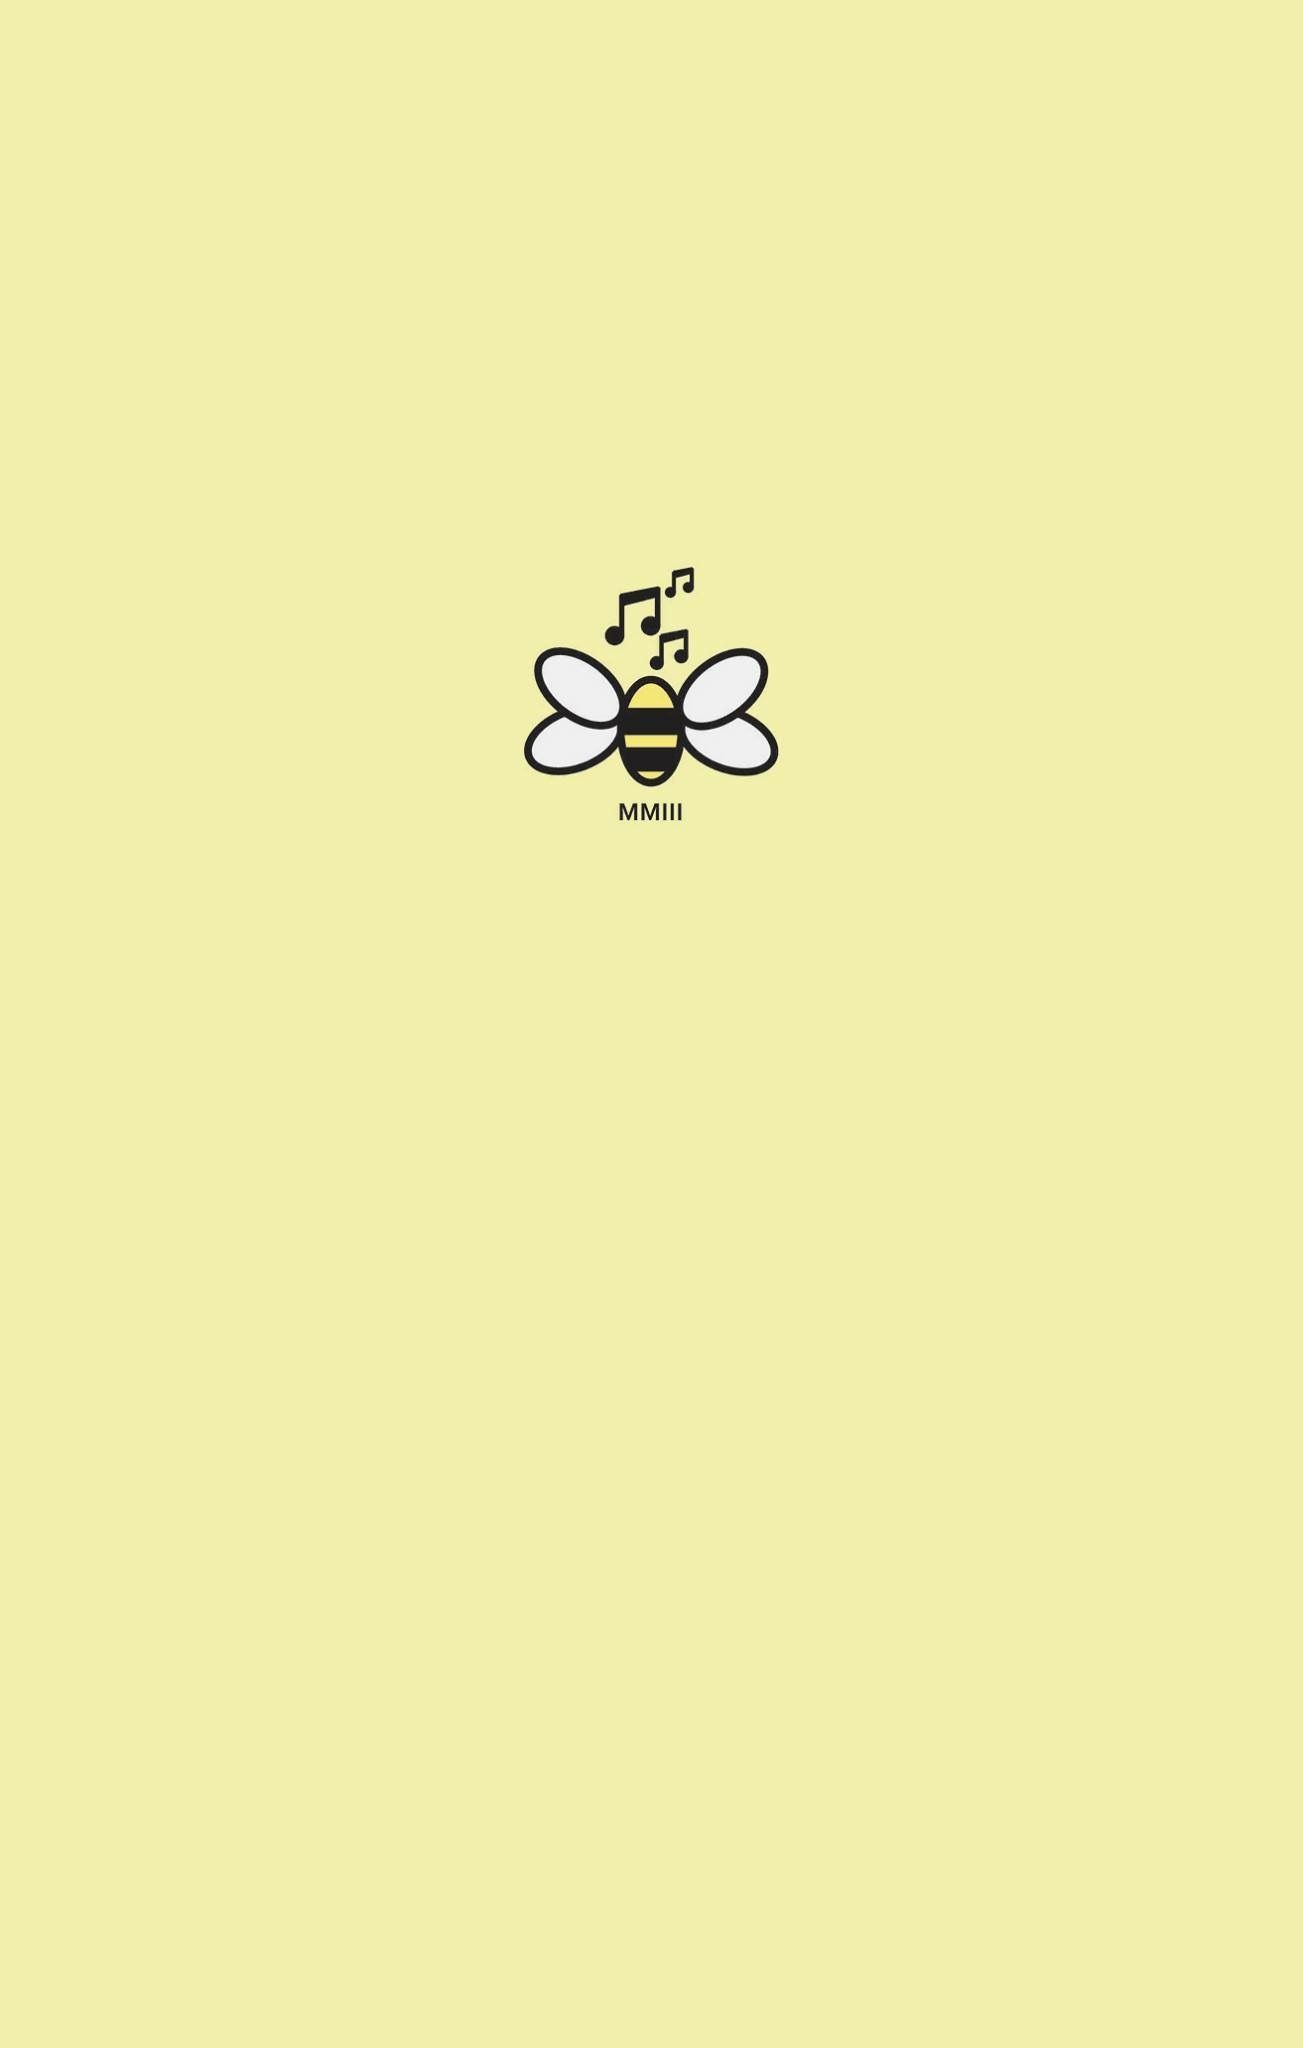 Free download Cute Pastel Yellow Aesthetic Wallpapers Top Cute Pastel